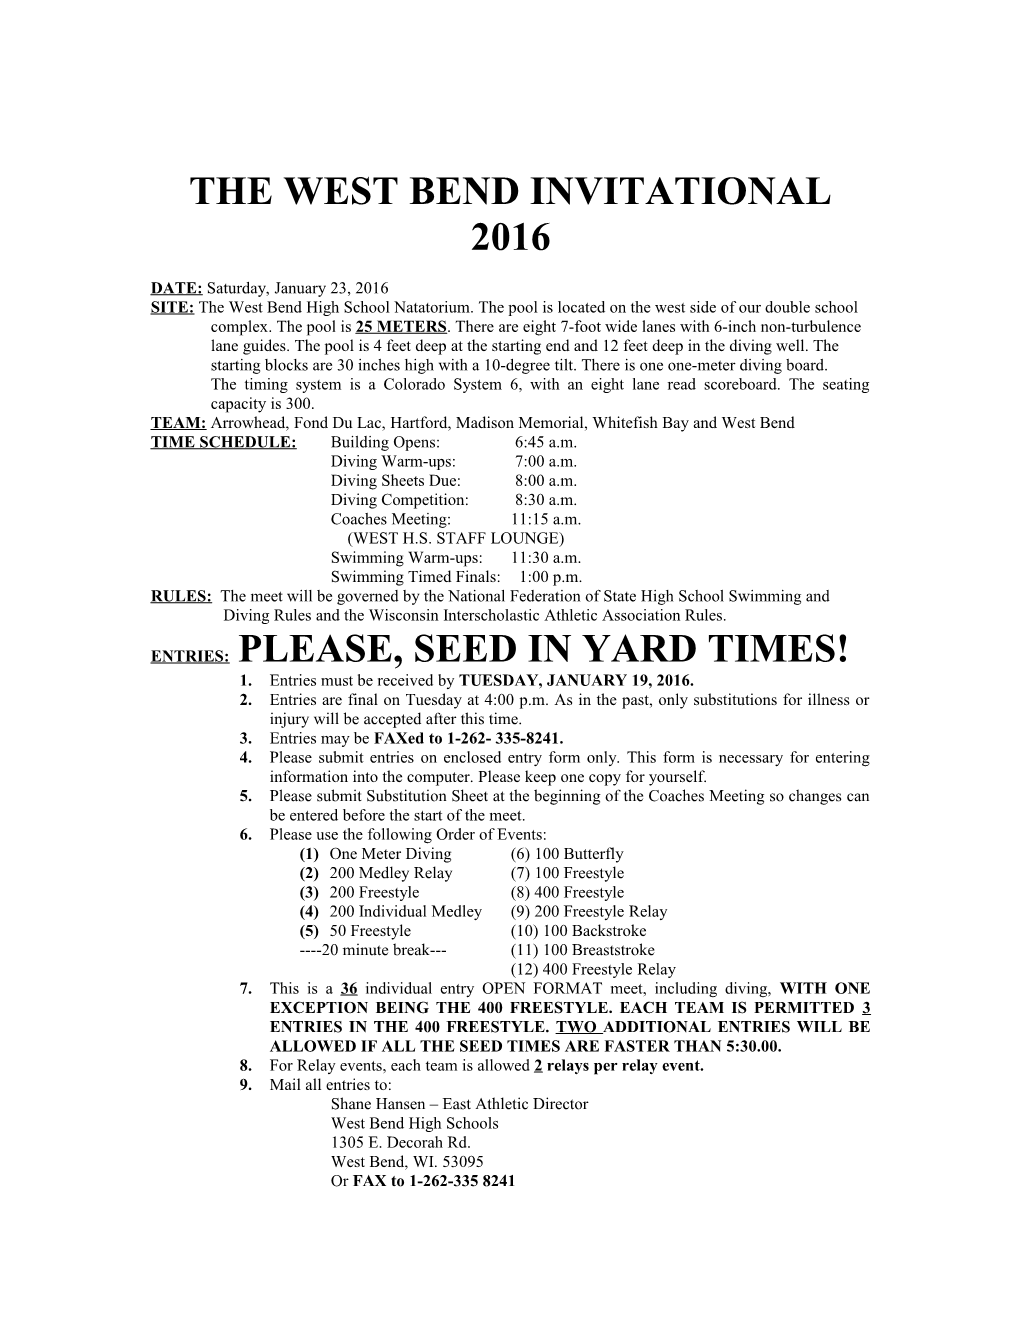 The West Bend Invitational